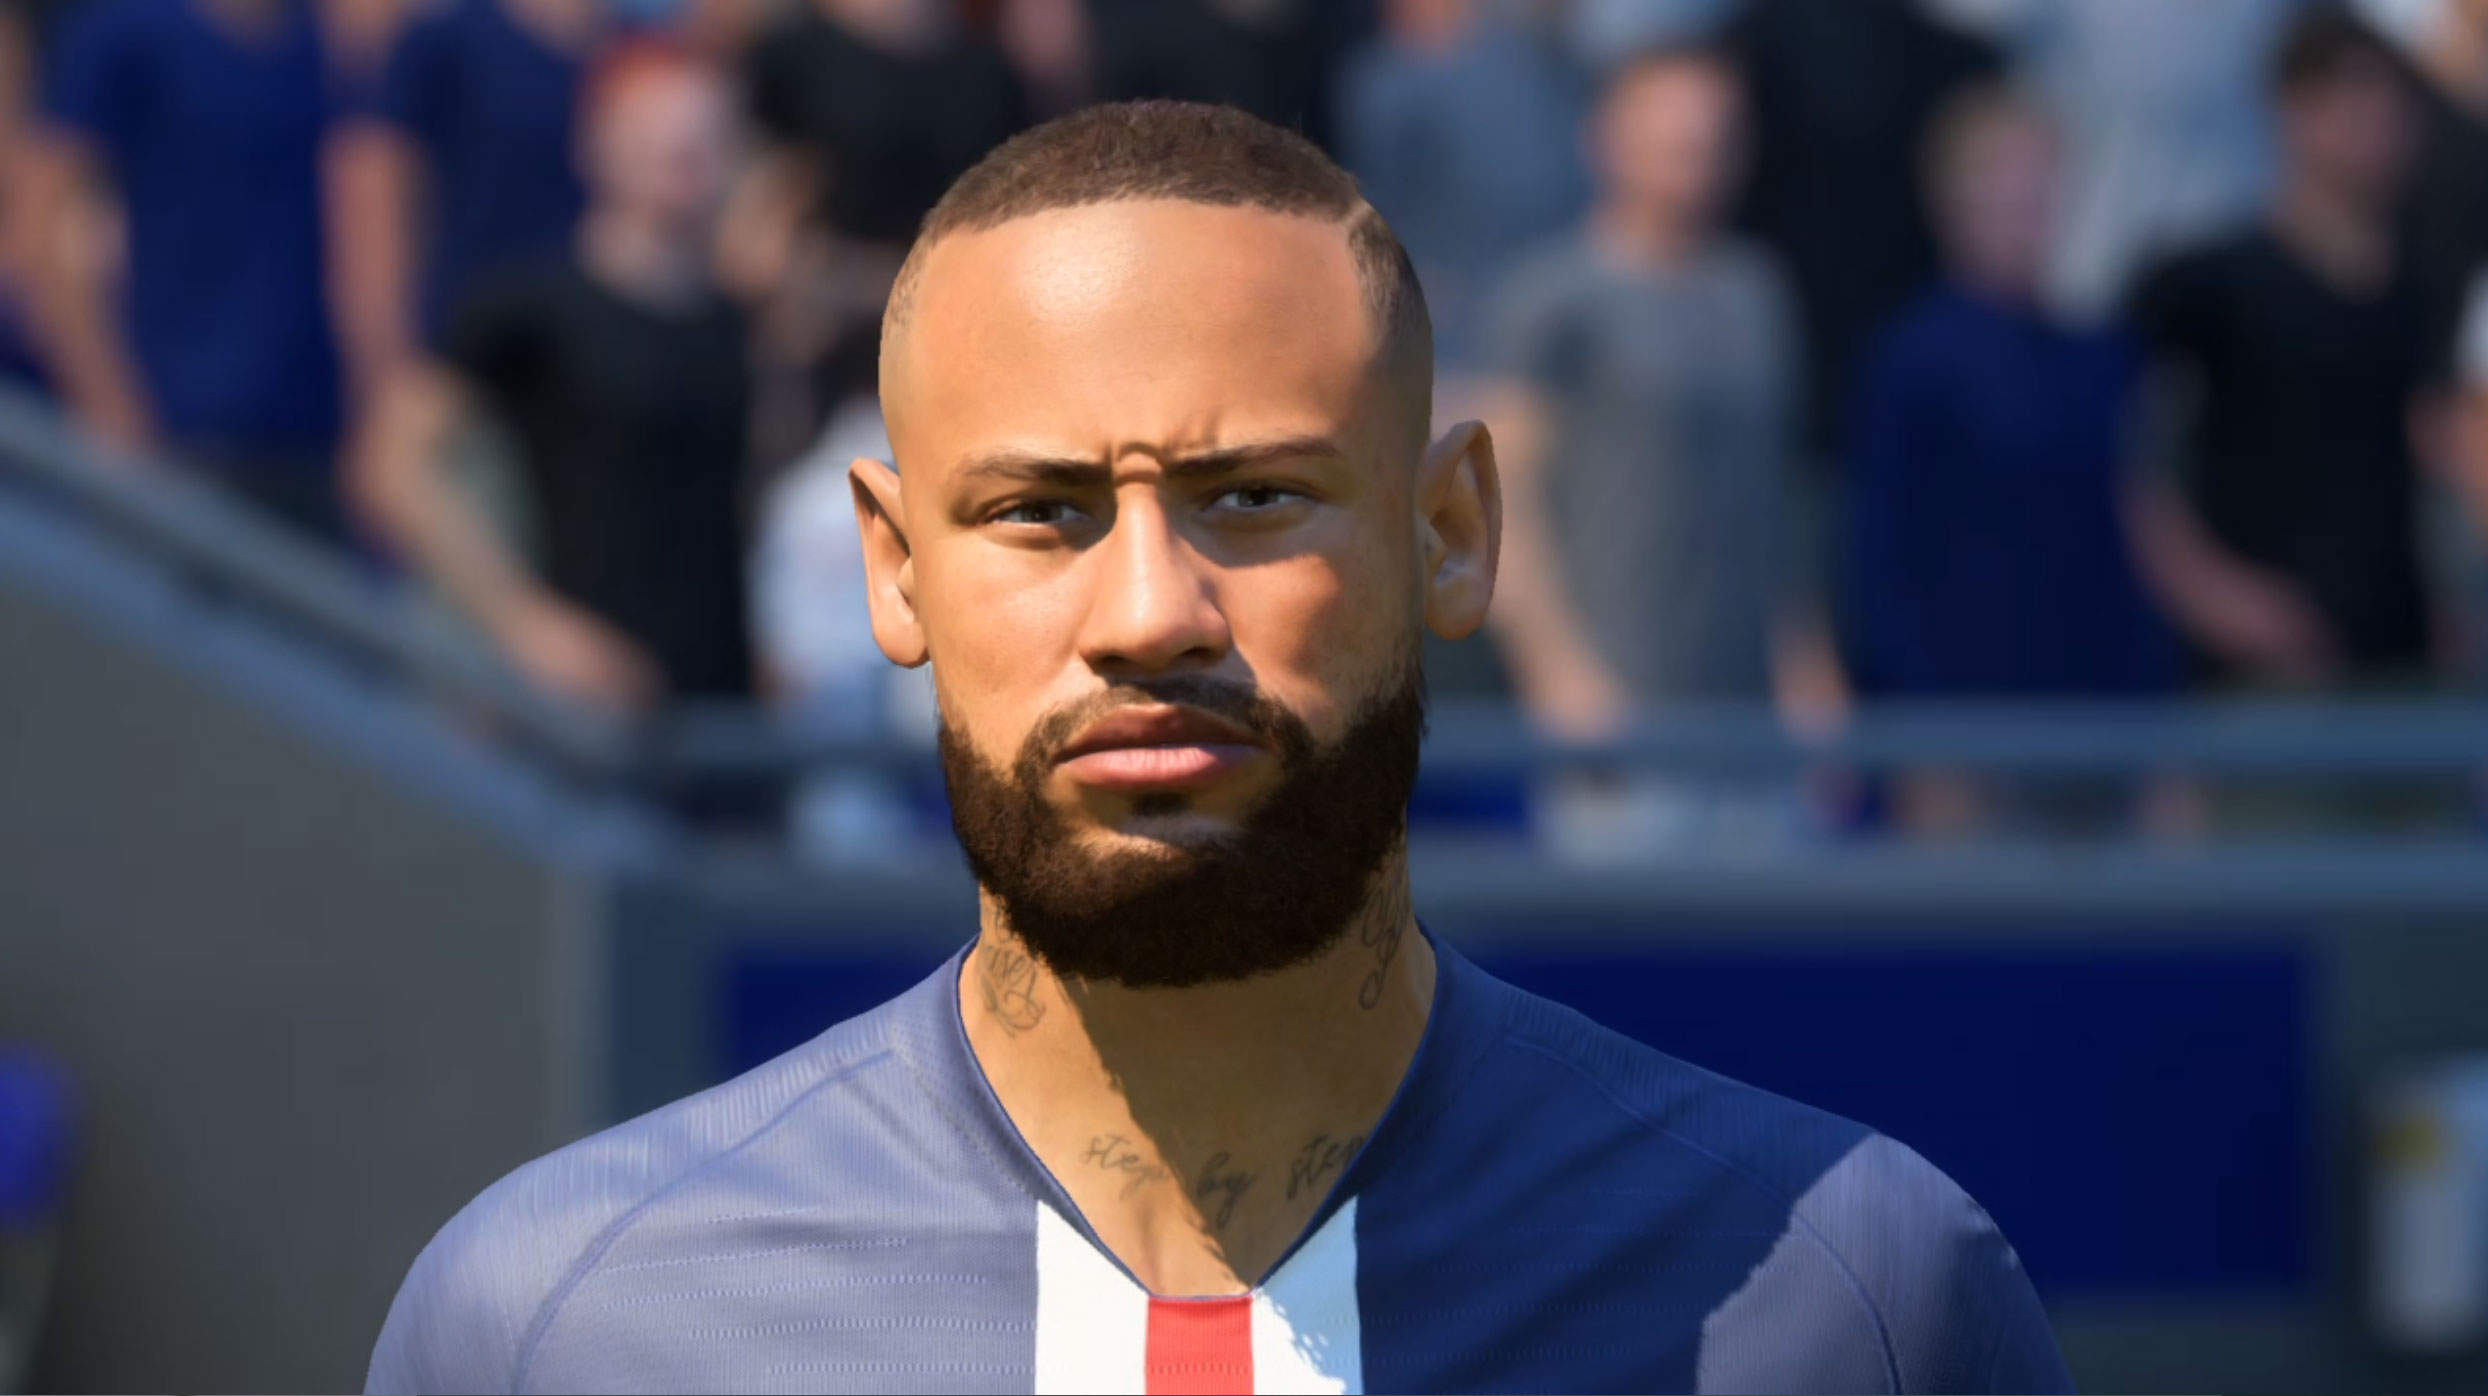 FIFA 21 Player Faces HighRes Images of the Most Popular